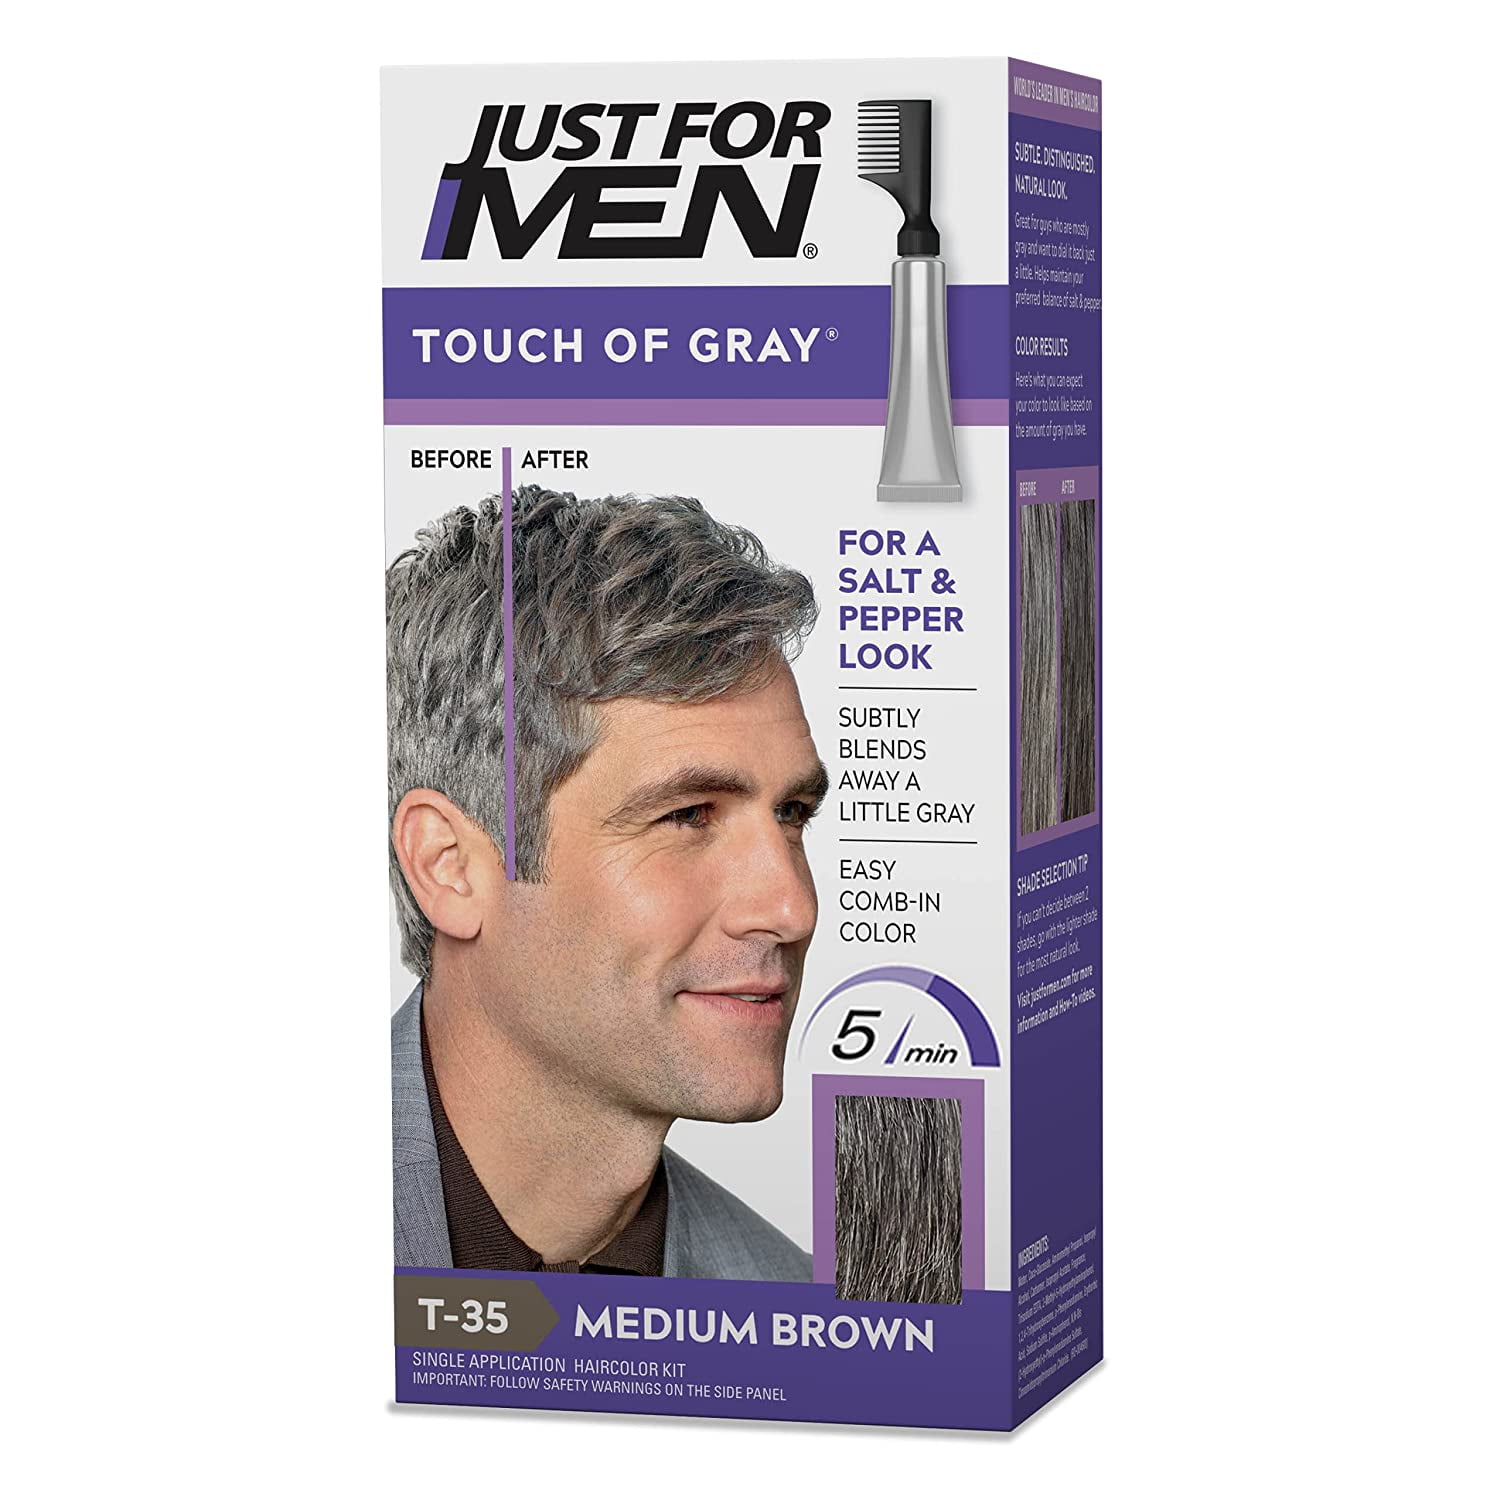 Touch Of Gray, Gray Hair Coloring for Men with Comb Applicator, Great for a  Salt and Pepper Look - Medium Brown, T-35 - Pack of 3 (Packaging May Vary)